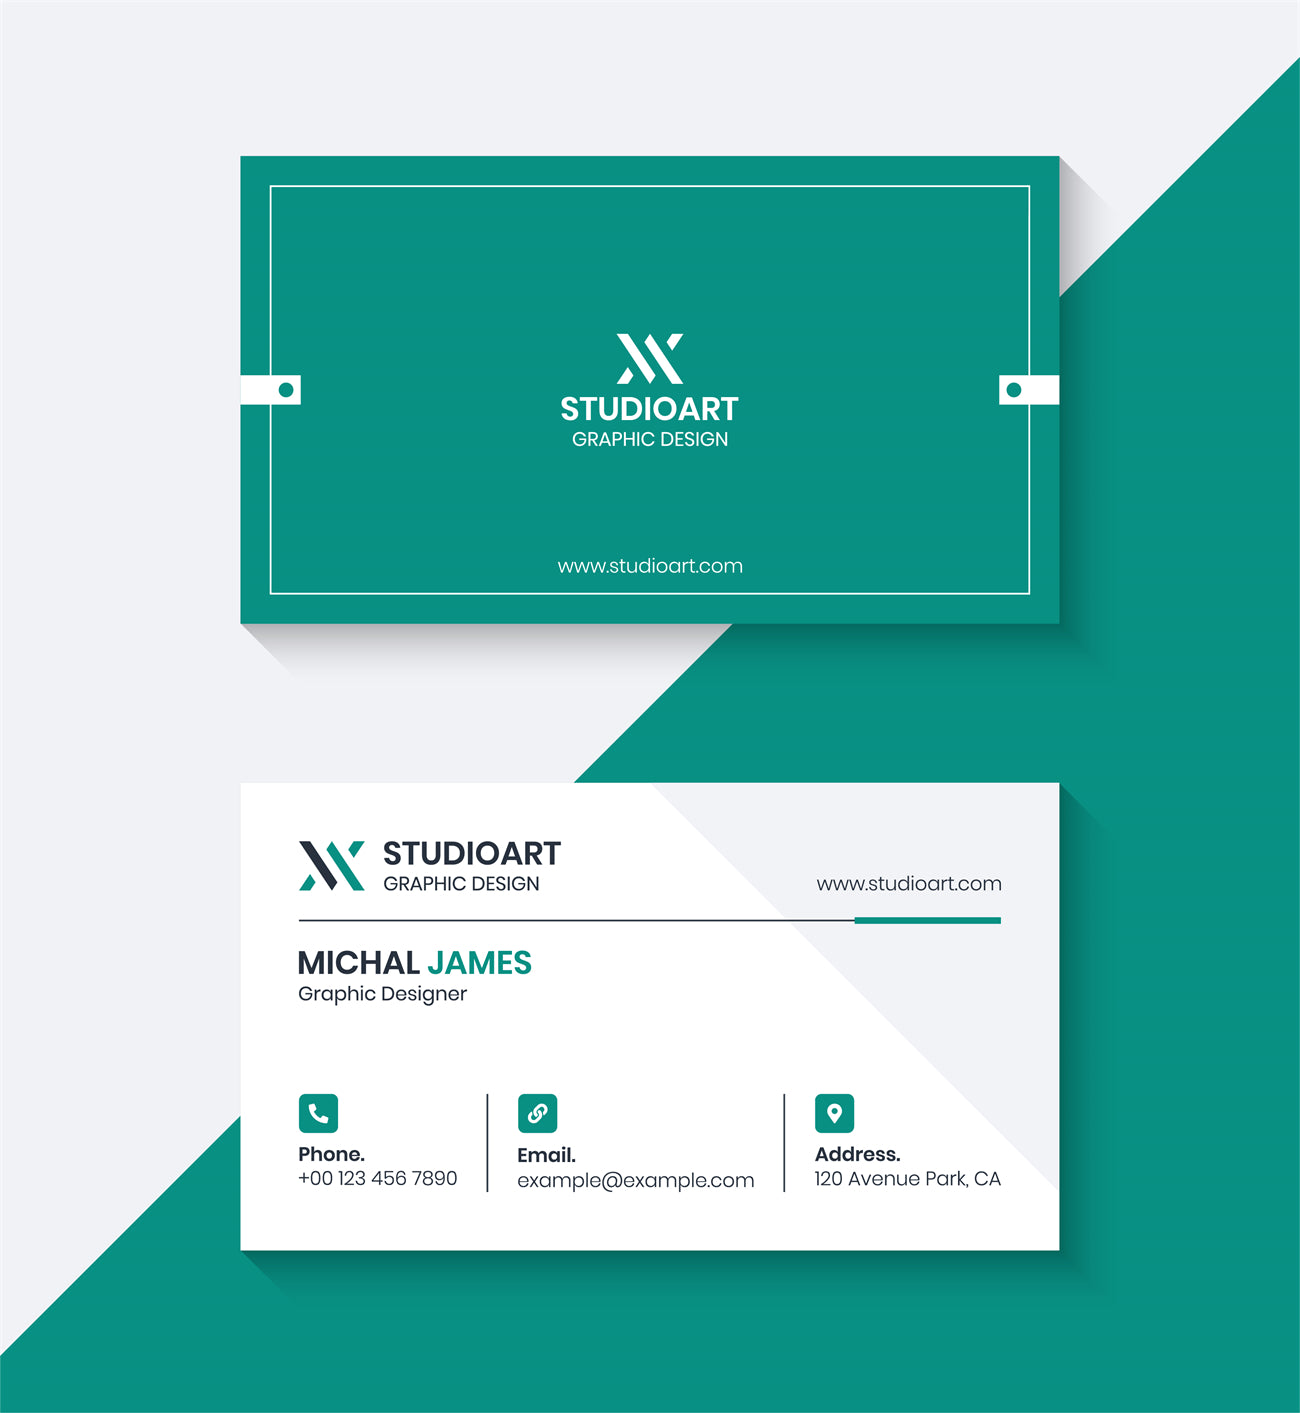 Professional Business Card Templates - Free